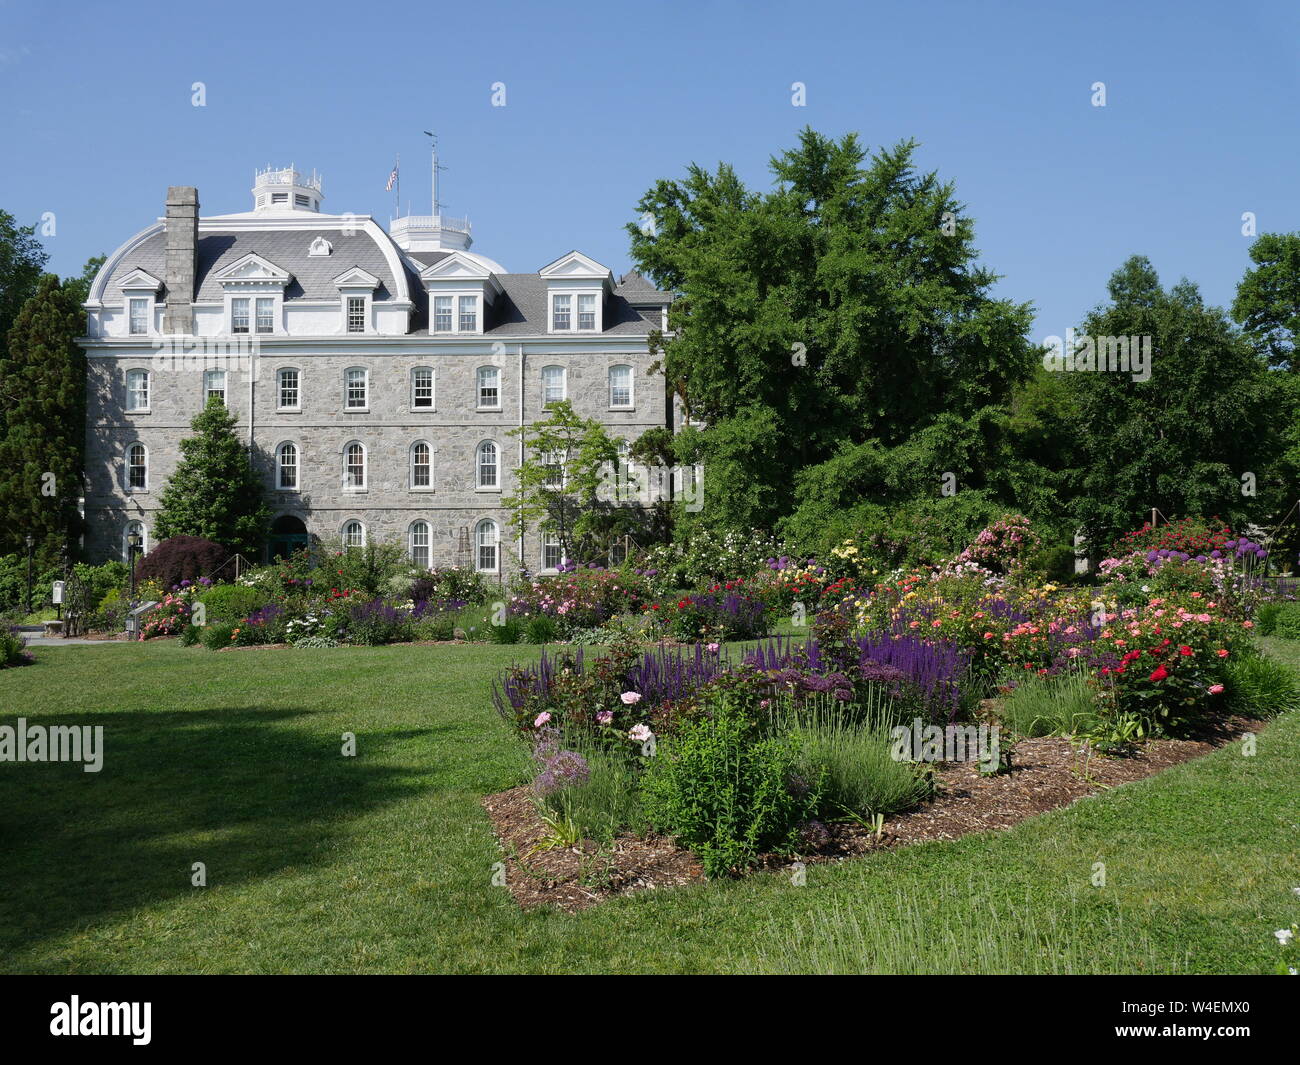 Swarthmore College is one of the best small colleges in the United States, with a beautifully landscaped campus. Stock Photo